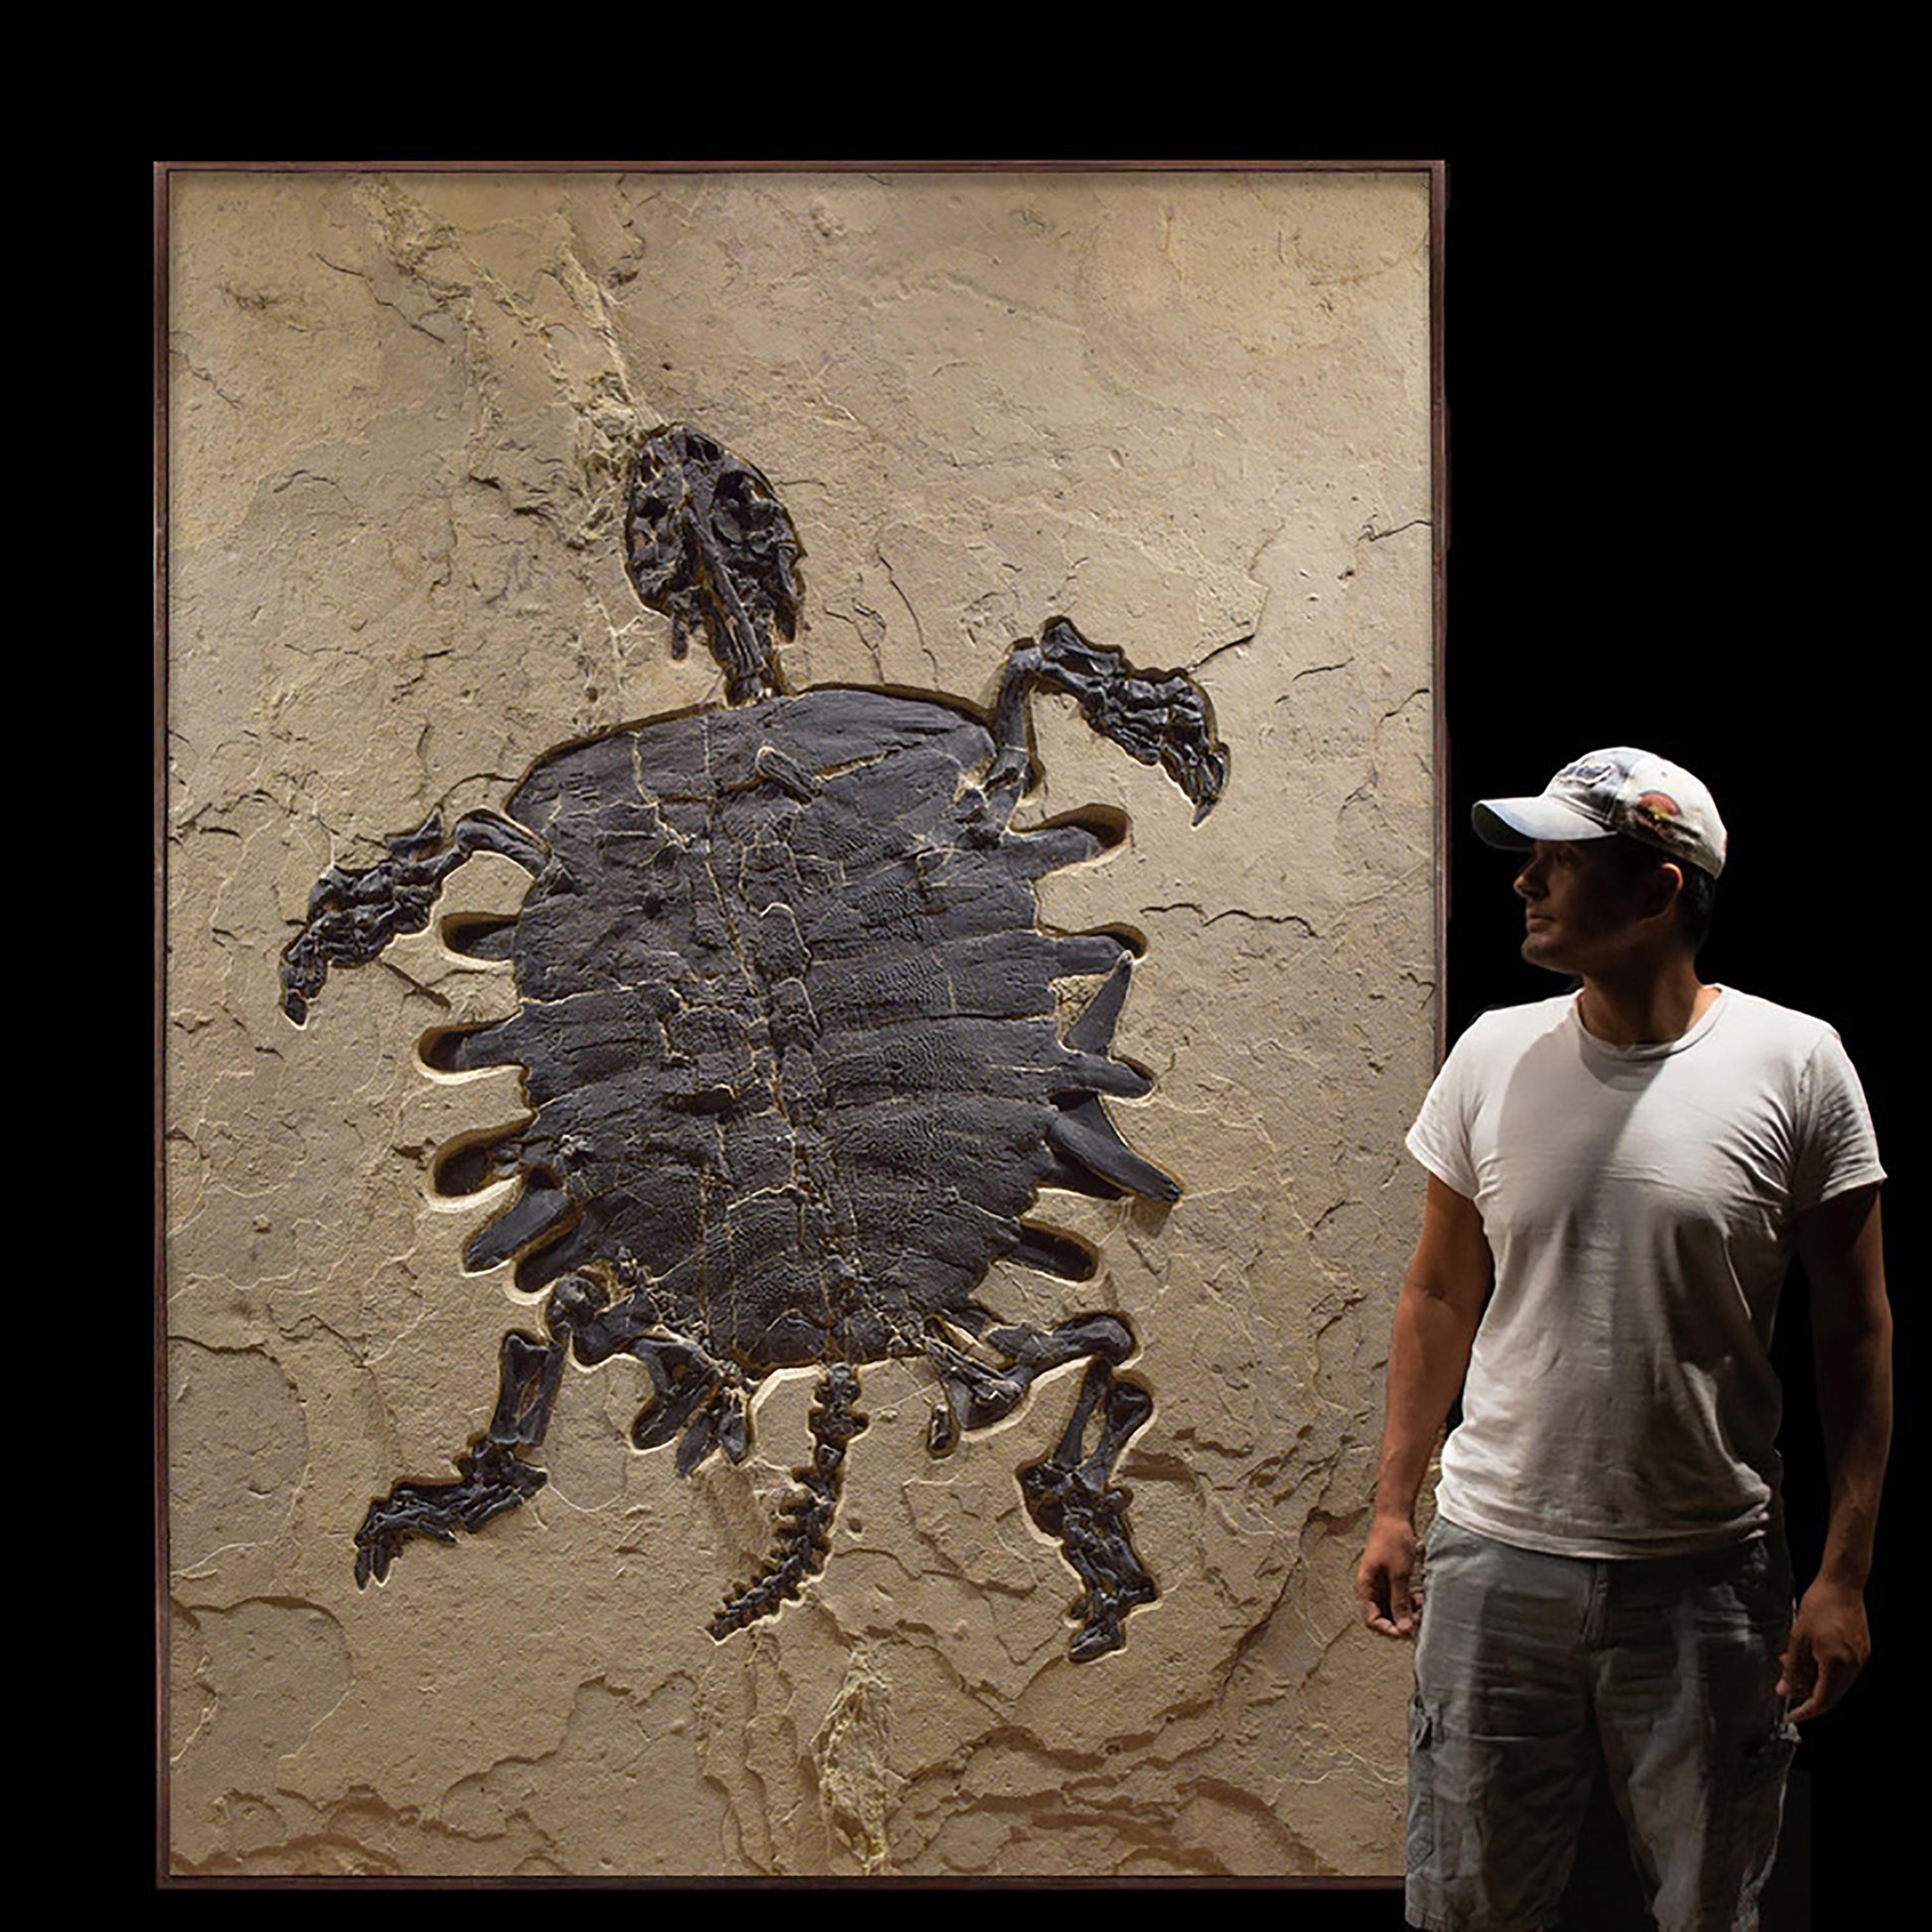 turtle fossil